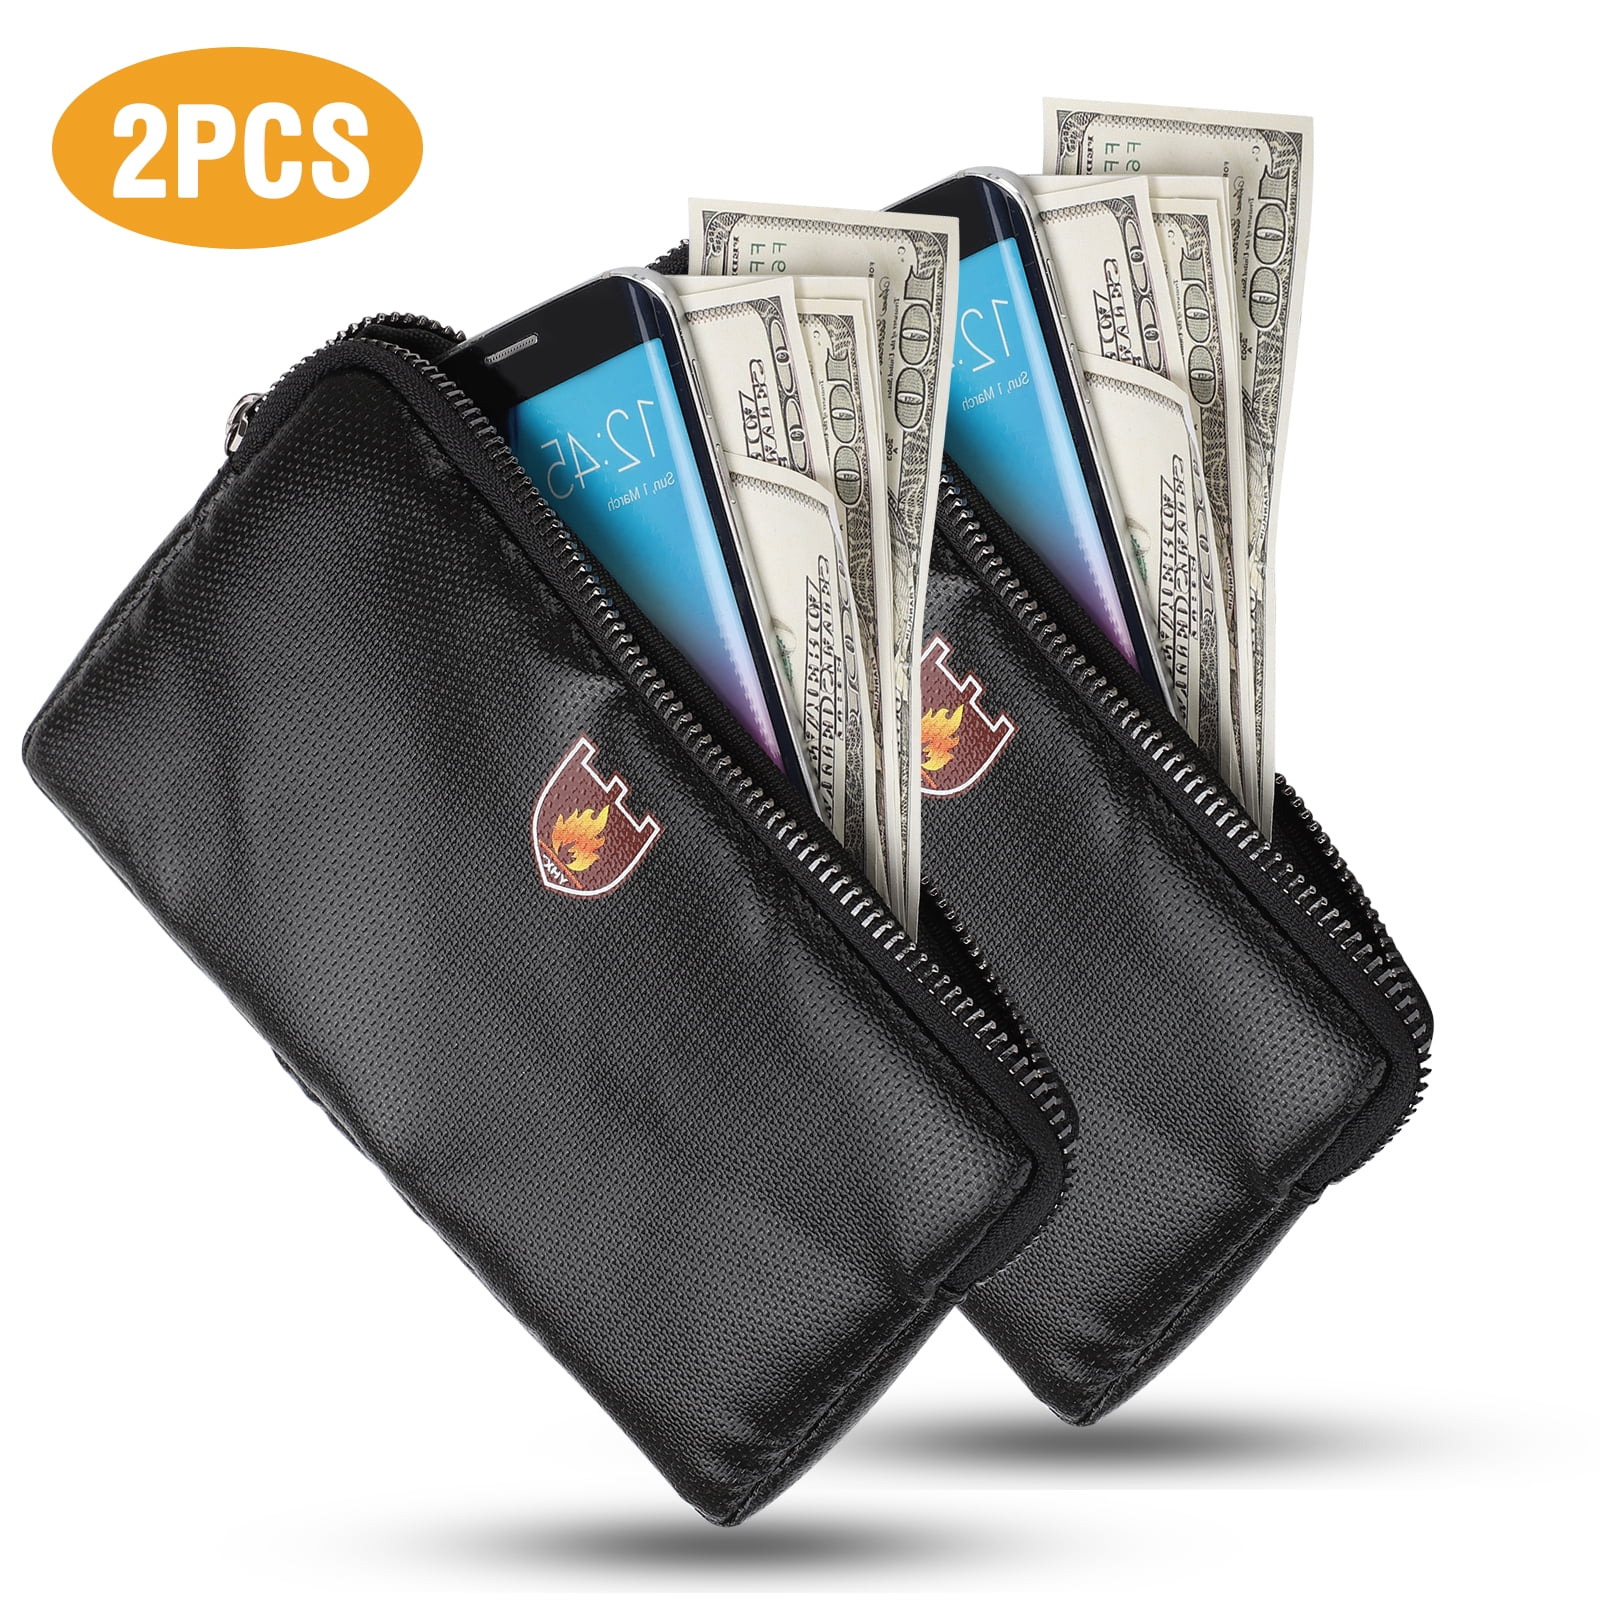 Fireproof Document Bags, EEEkit 8.2x4.7 Waterproof and Fireproof Money  Bag, Fireproof Safe Storage Pouch with Zipper, Silicone Coated Cash Bags  for Jewelry, File, Tablet, iPad, Passport, Valuables 